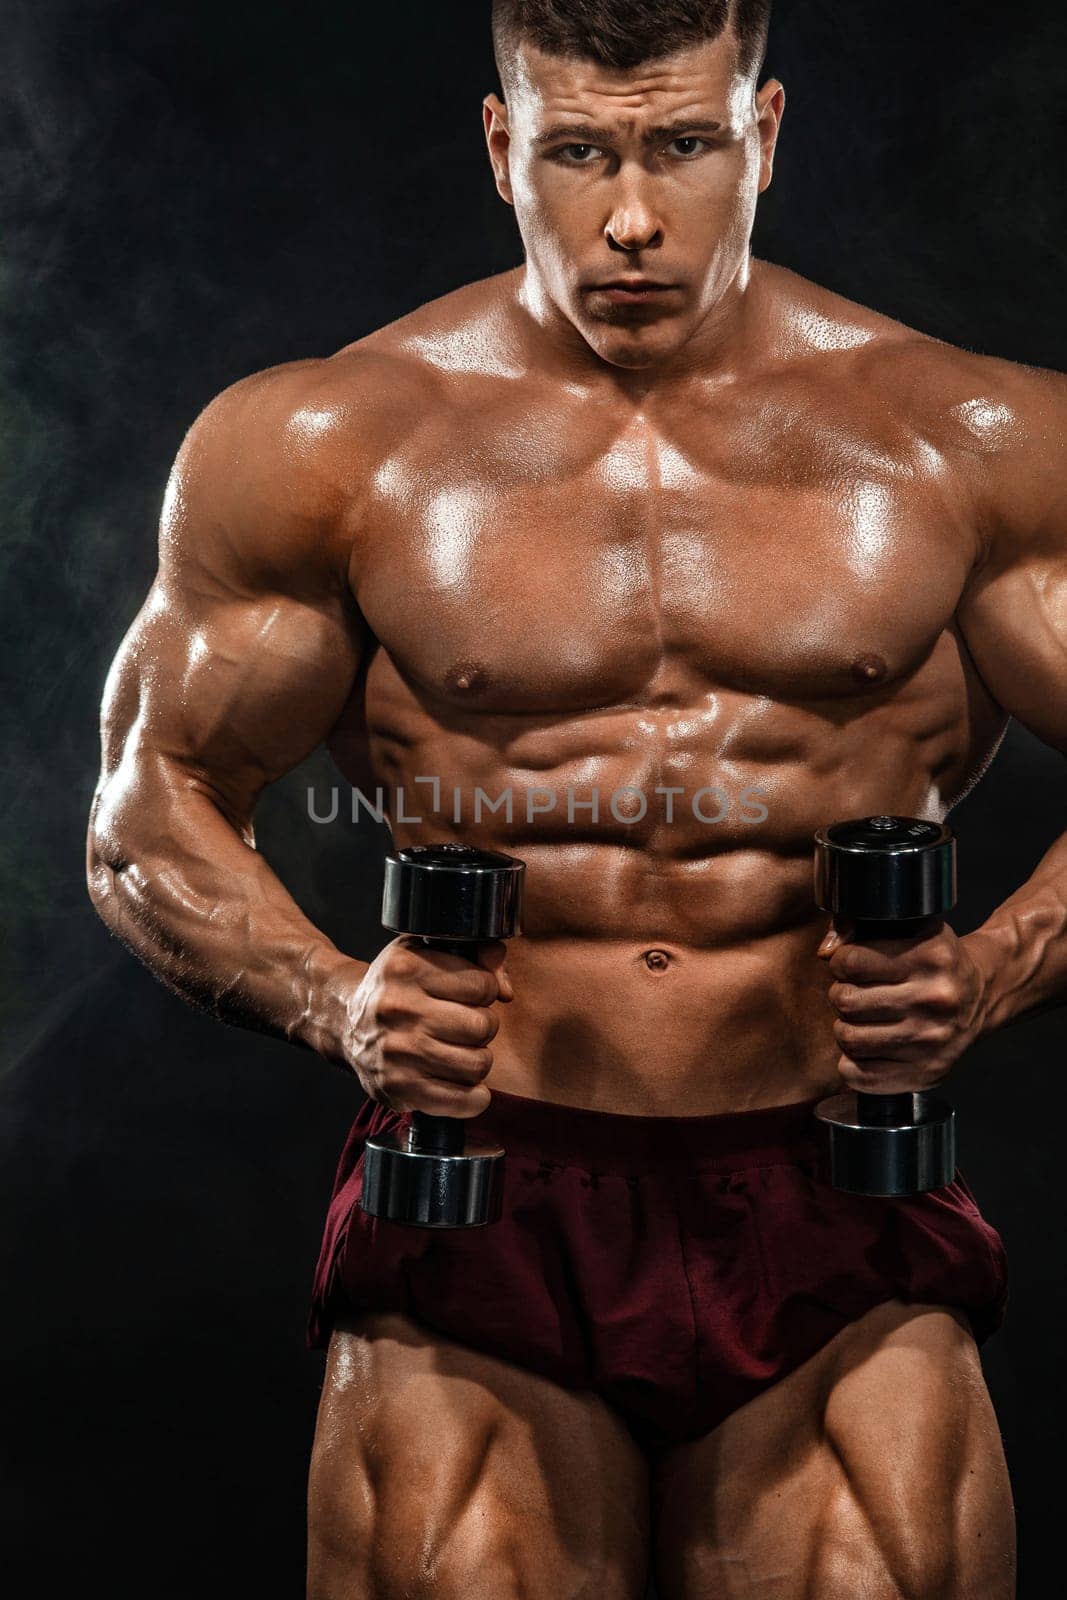 Brutal strong muscular bodybuilder athletic man pumping up muscles with dumbbell on black background. Workout bodybuilding concept. Copy space for sport nutrition ads. by MikeOrlov